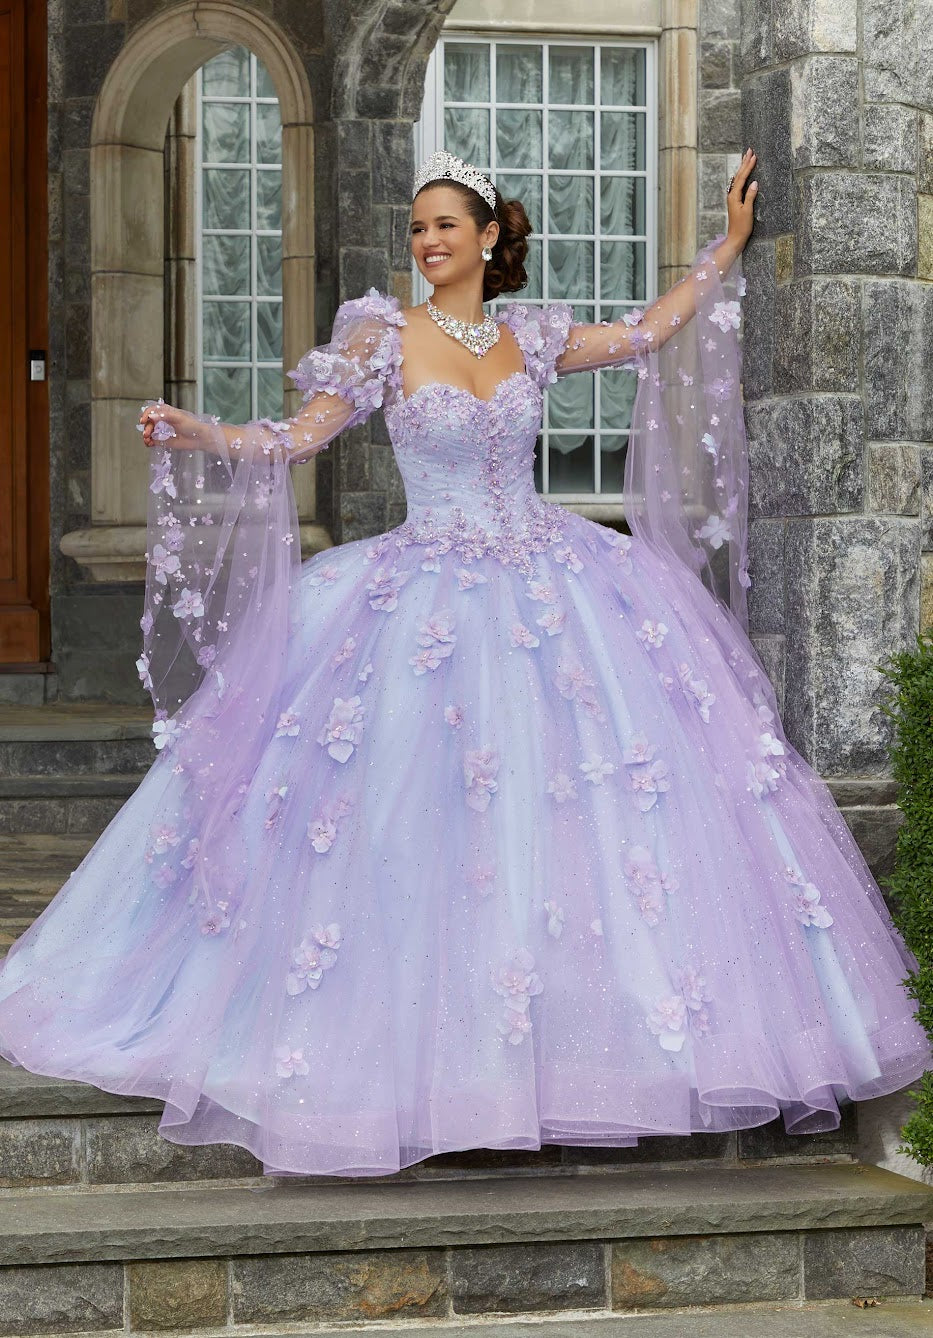 11279 | Glitter Tulle Quinceañera Dress with Three-Dimensional Floral Appliqués